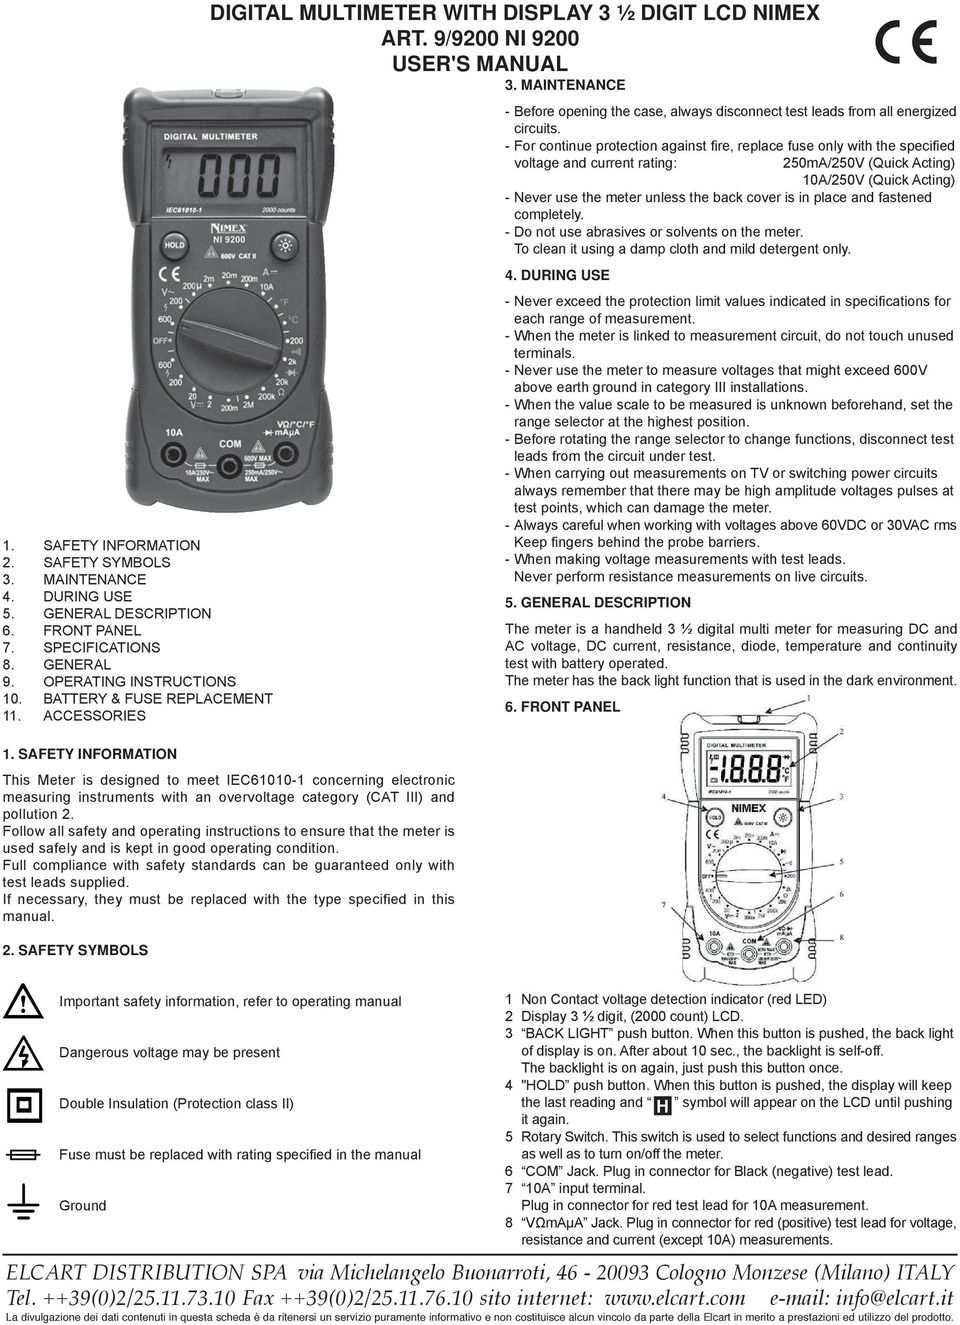 SAFETY INFORMATION This Meter is designed to meet IEC61010-1 concerning electronic measuring instruments with an overvoltage category (CAT III) and pollution 2.